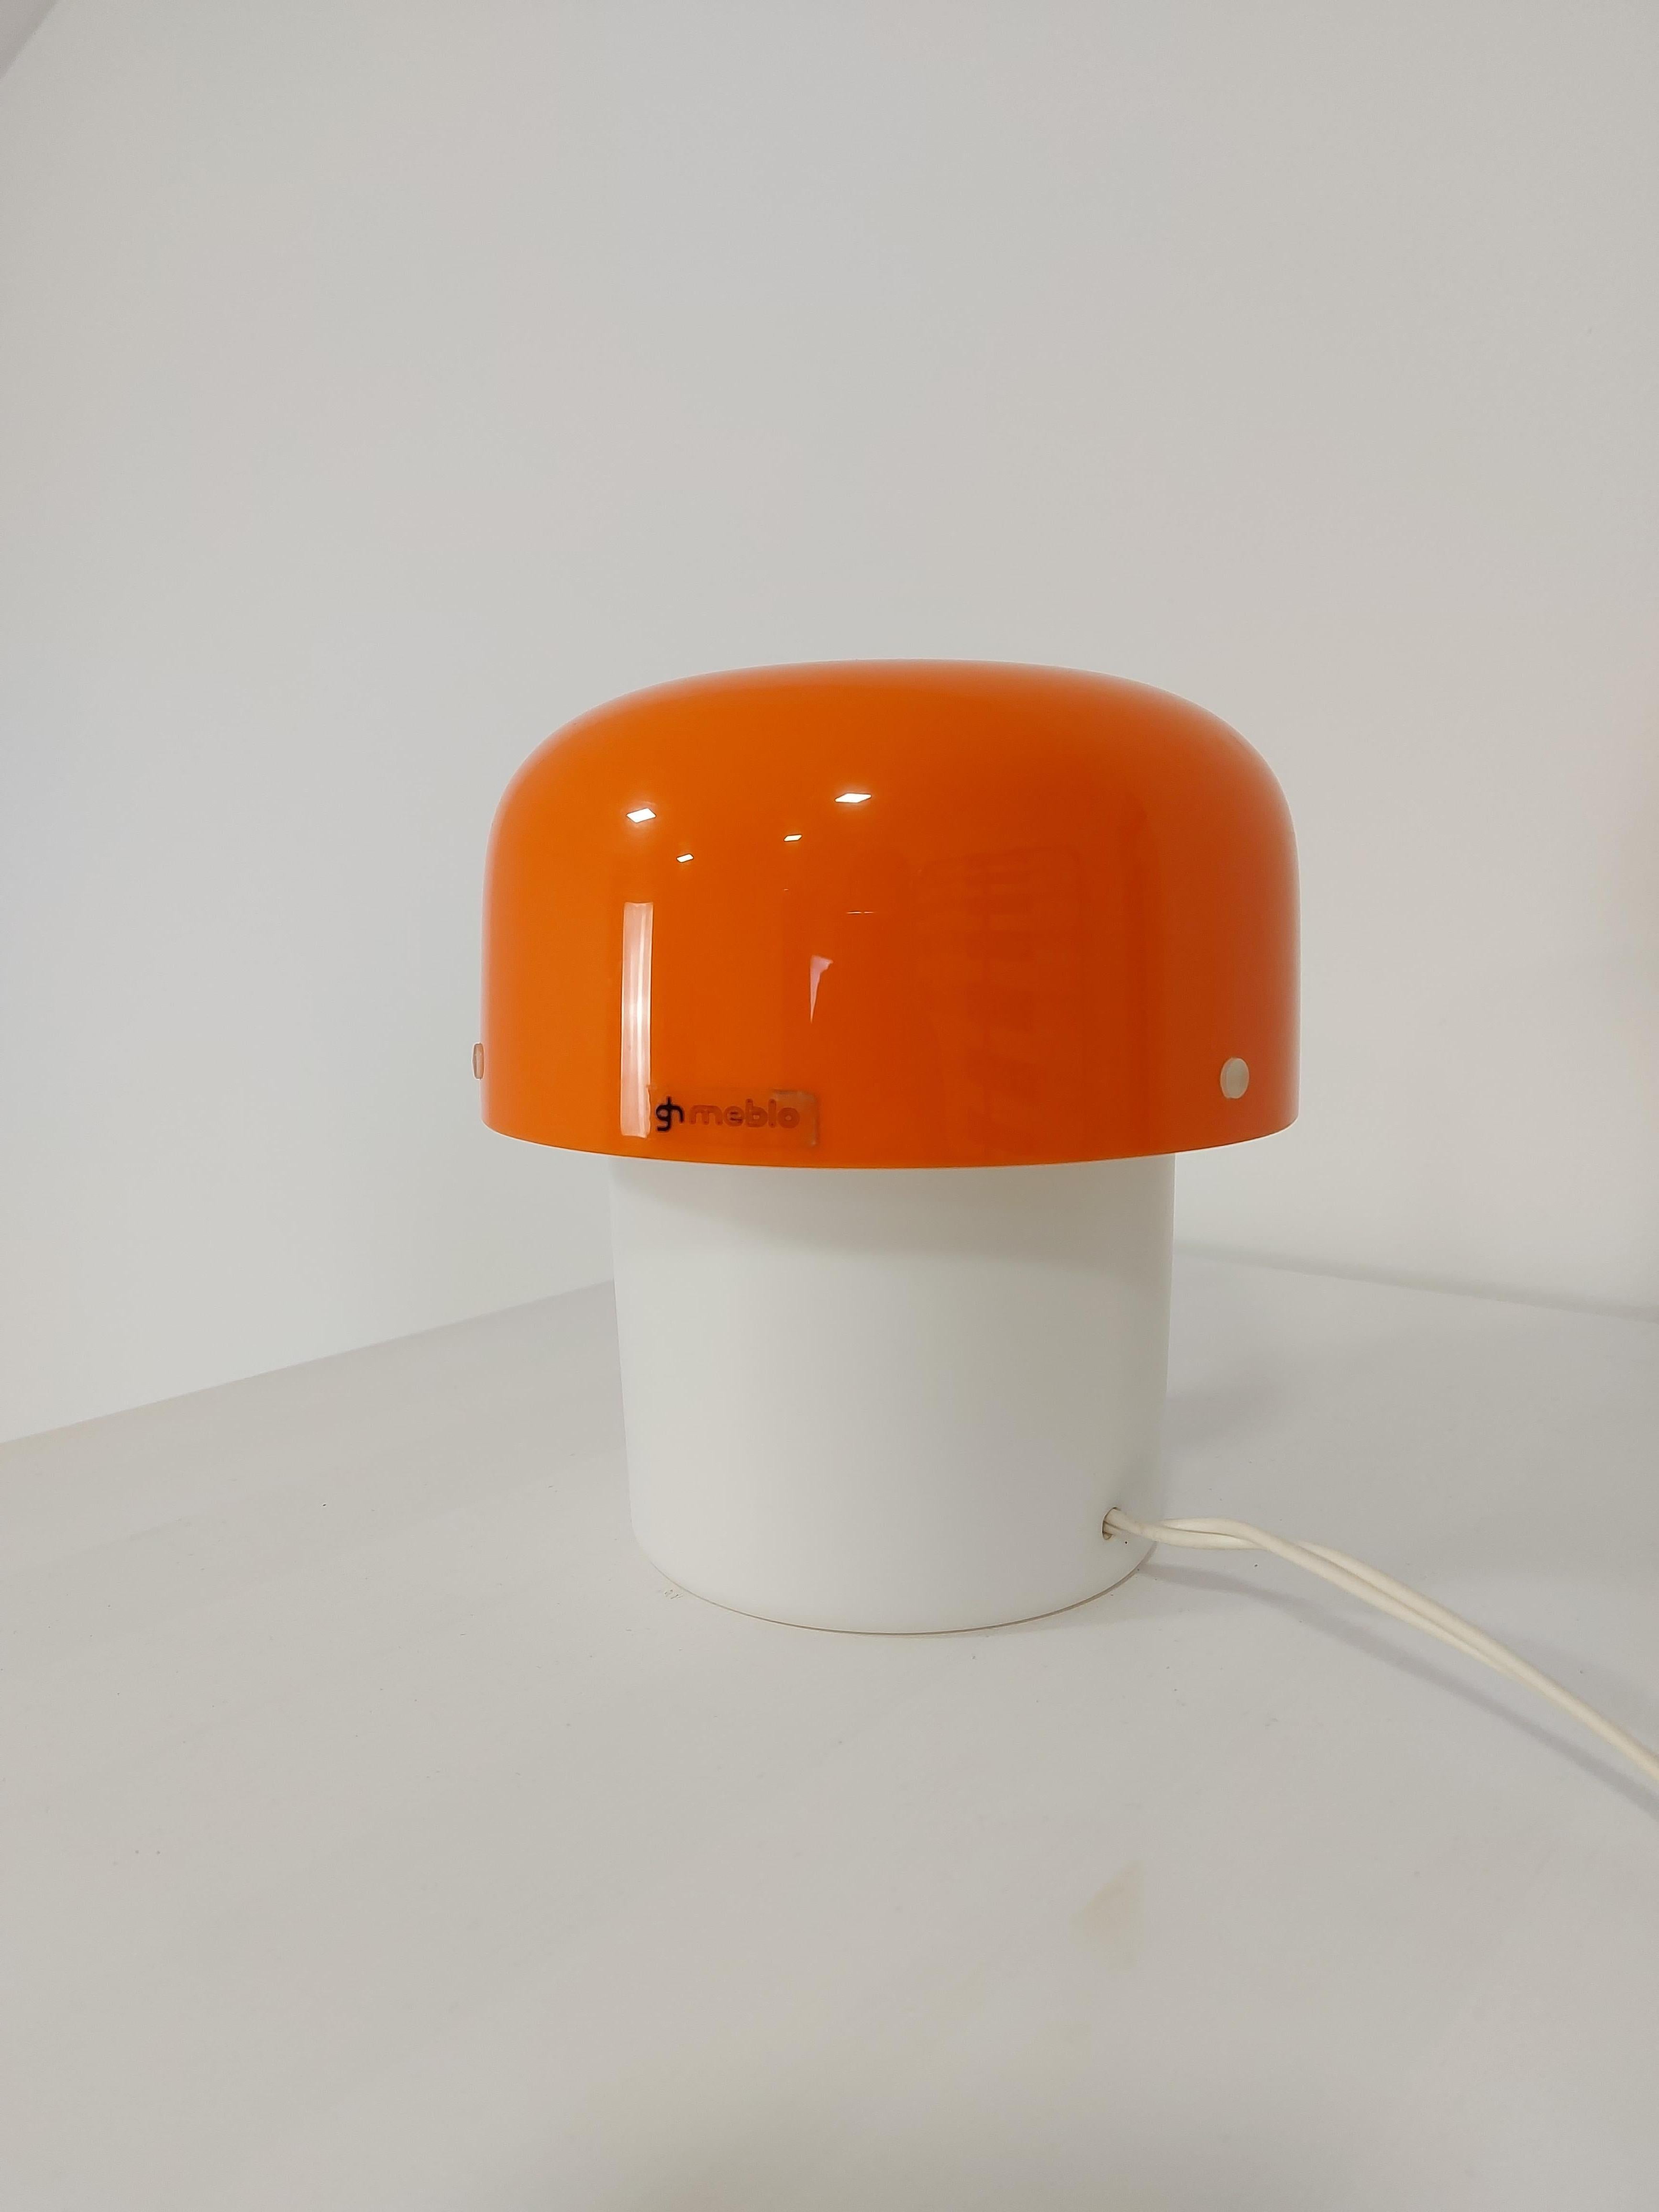 Elegant Harvey guzzini lamp by Meblo in the 70's. This is a small and rare lamp in good condition, it works perfectly. The lamp creates warm atmosphere. Nice little lamp from the 70's.